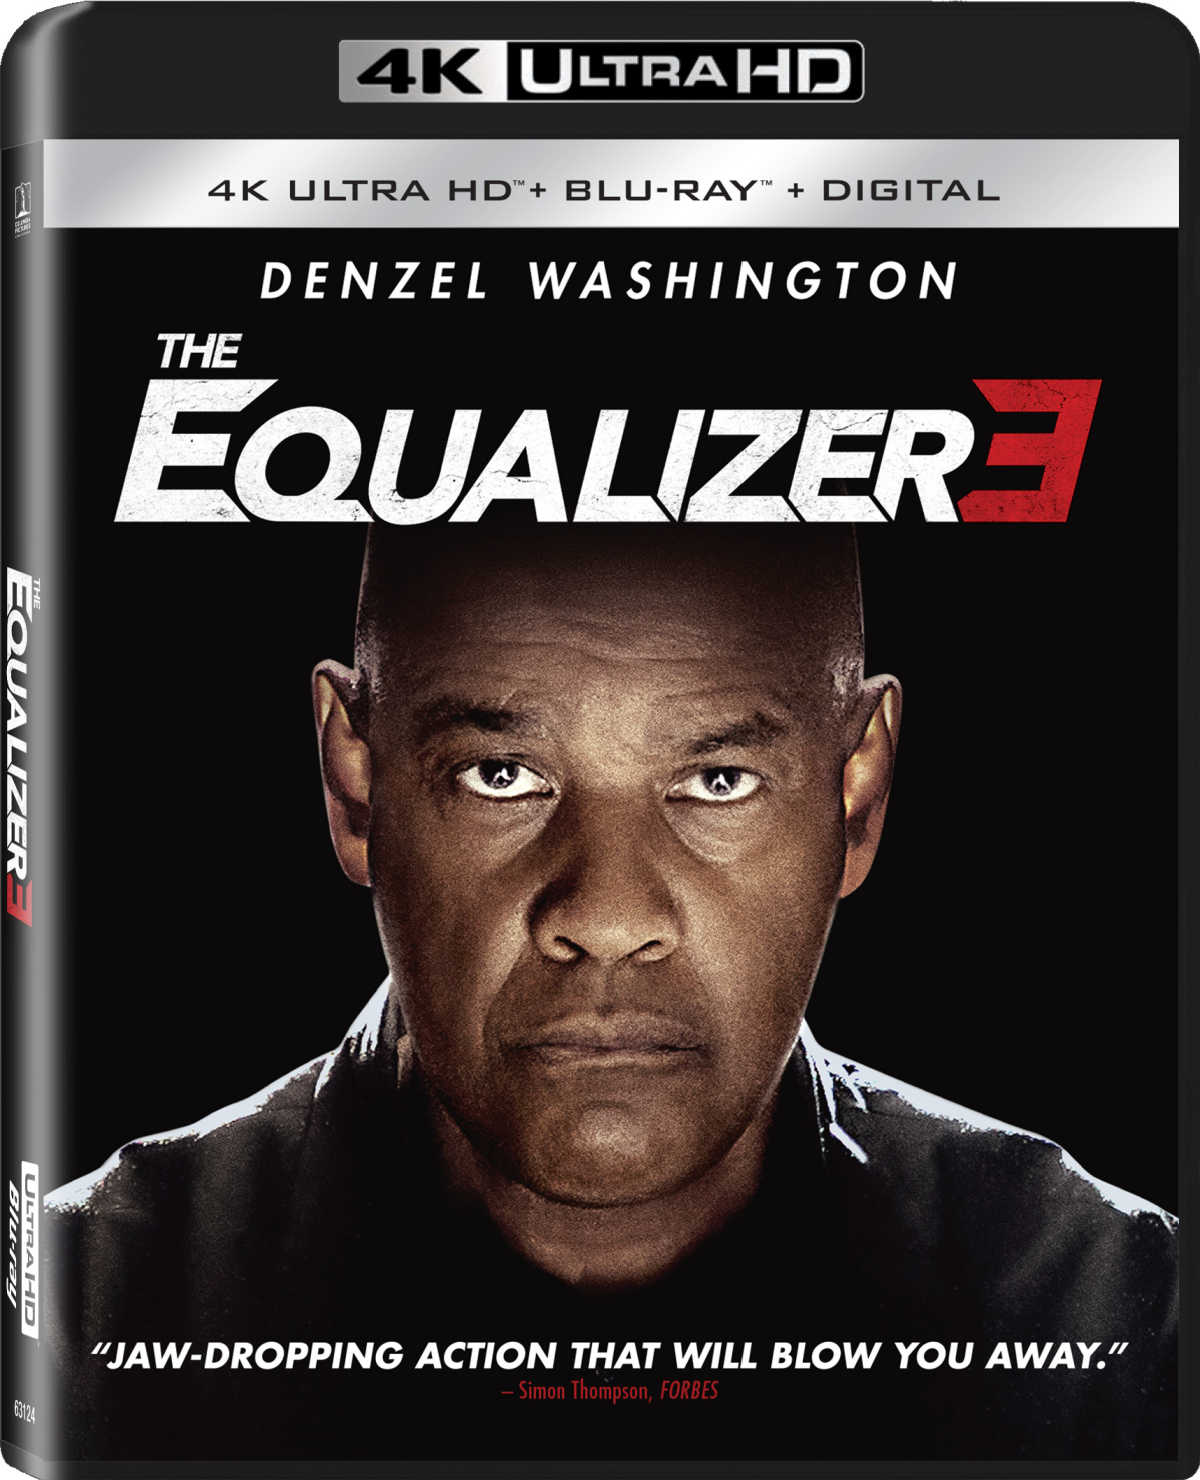 The Equalizer 3 Ultra HD Blu-ray Combo is the definitive way to watch this action-packed thriller. With stunning 4K visuals and immersive audio, you'll feel like you're right in the middle of the action. Plus, enjoy exclusive bonus features that you won't find anywhere else.